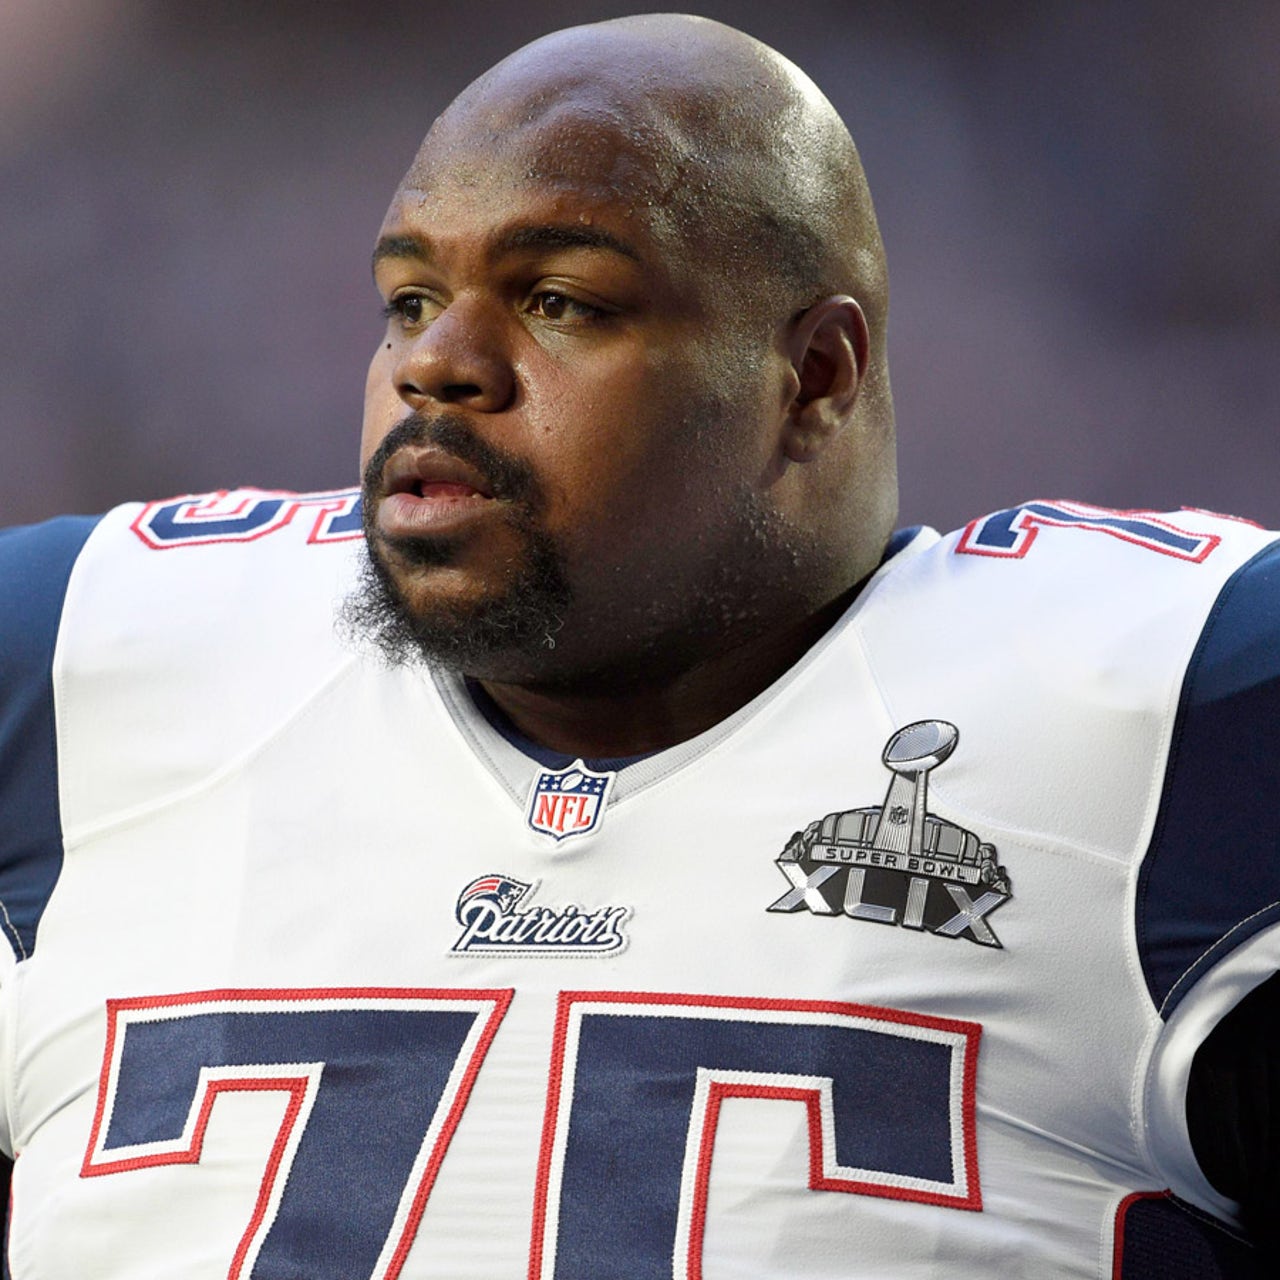 New England Super Bowl champion Vince Wilfork signs for Houston